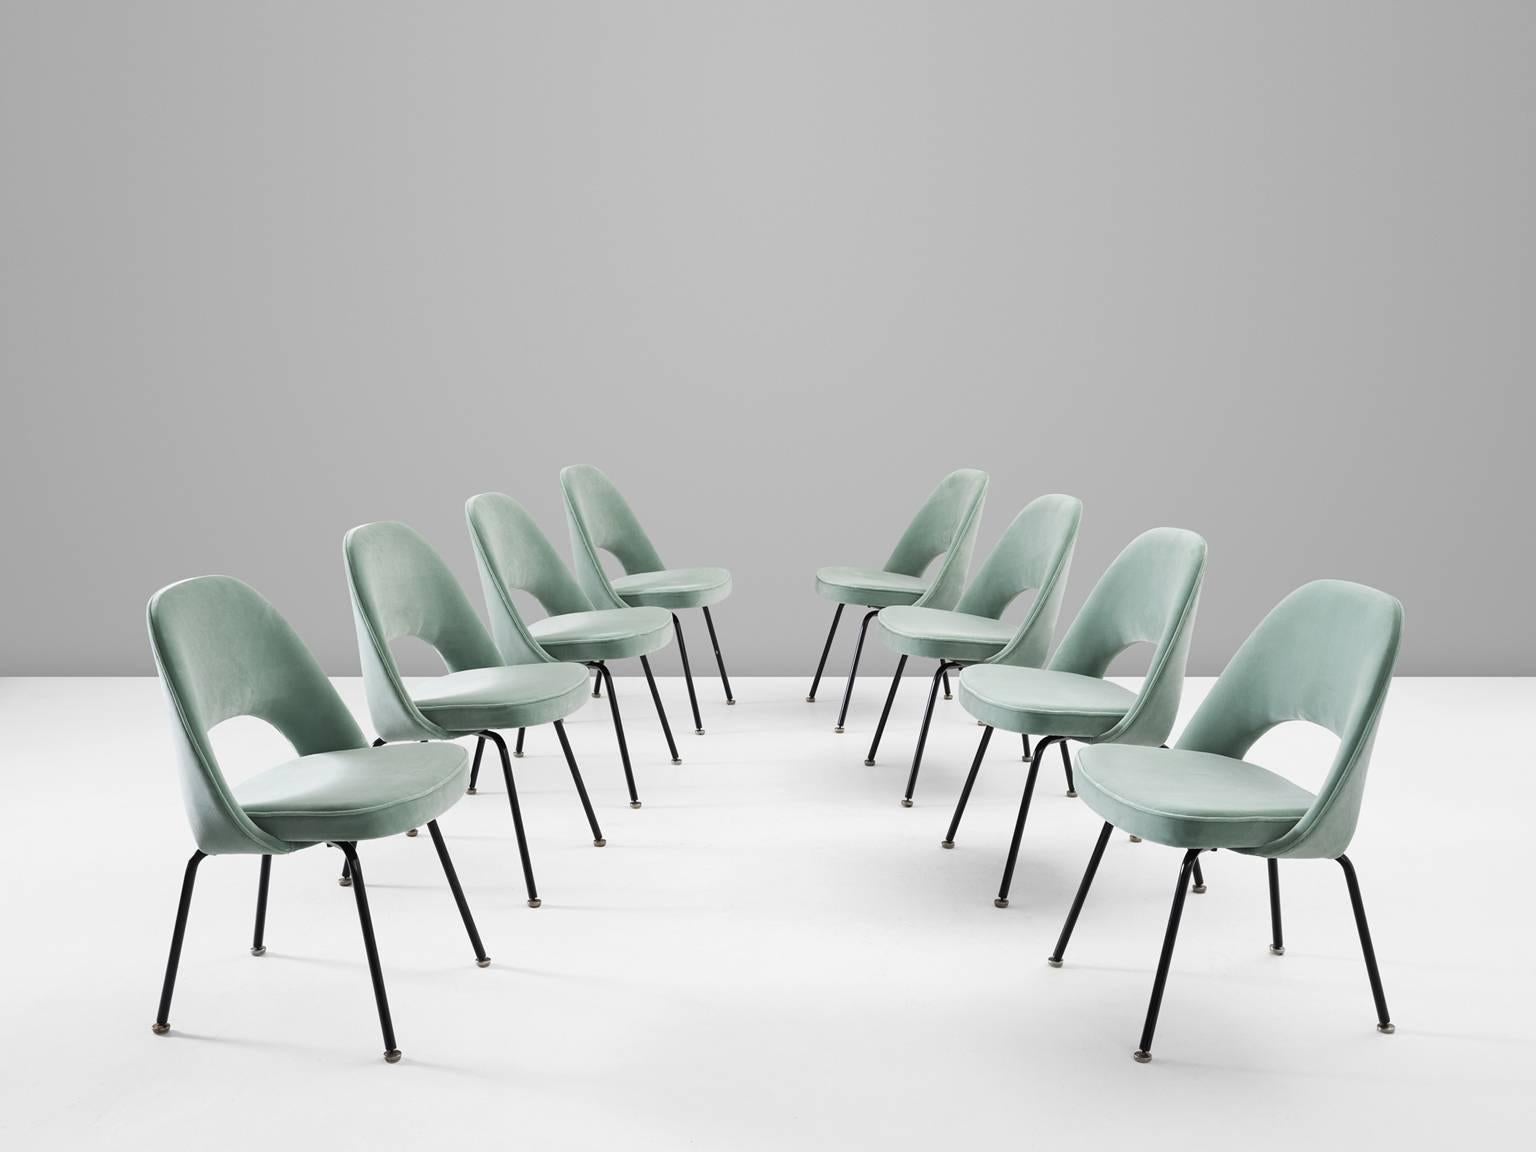 Set of 8 chairs model 72, in metal and turquoise fabric, by Eero Saarinen for Knoll International, United States, design 1948, later production.

Eight organic shaped chairs designed by Eero Saarinen. This iconic model is reupholstered in a soft